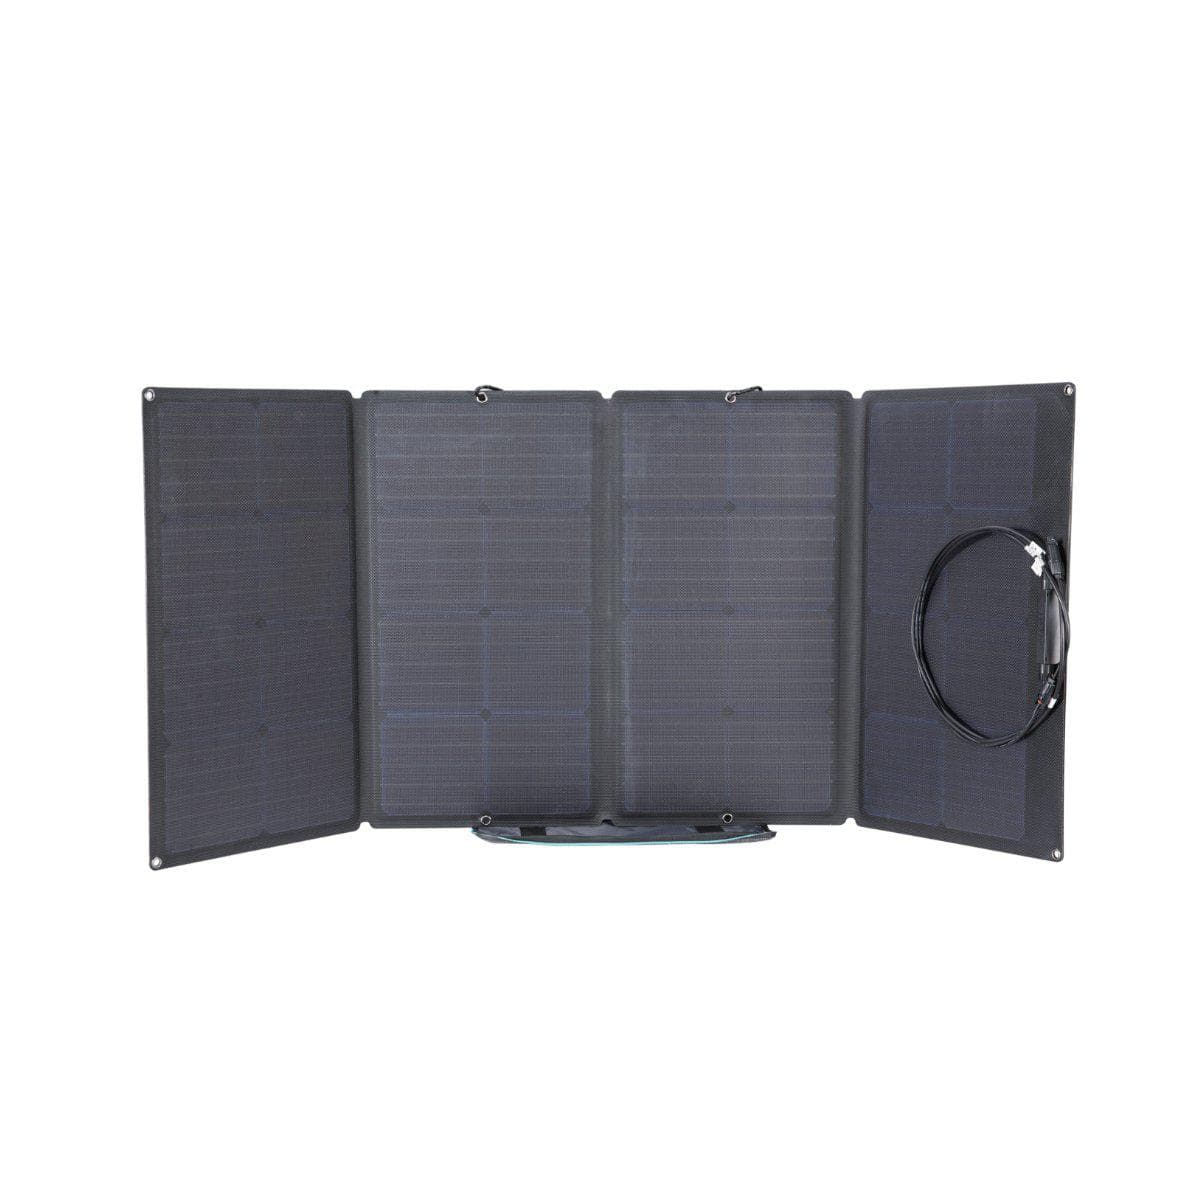 EcoFlow 160W Solar Panel (Recommended Accessory)